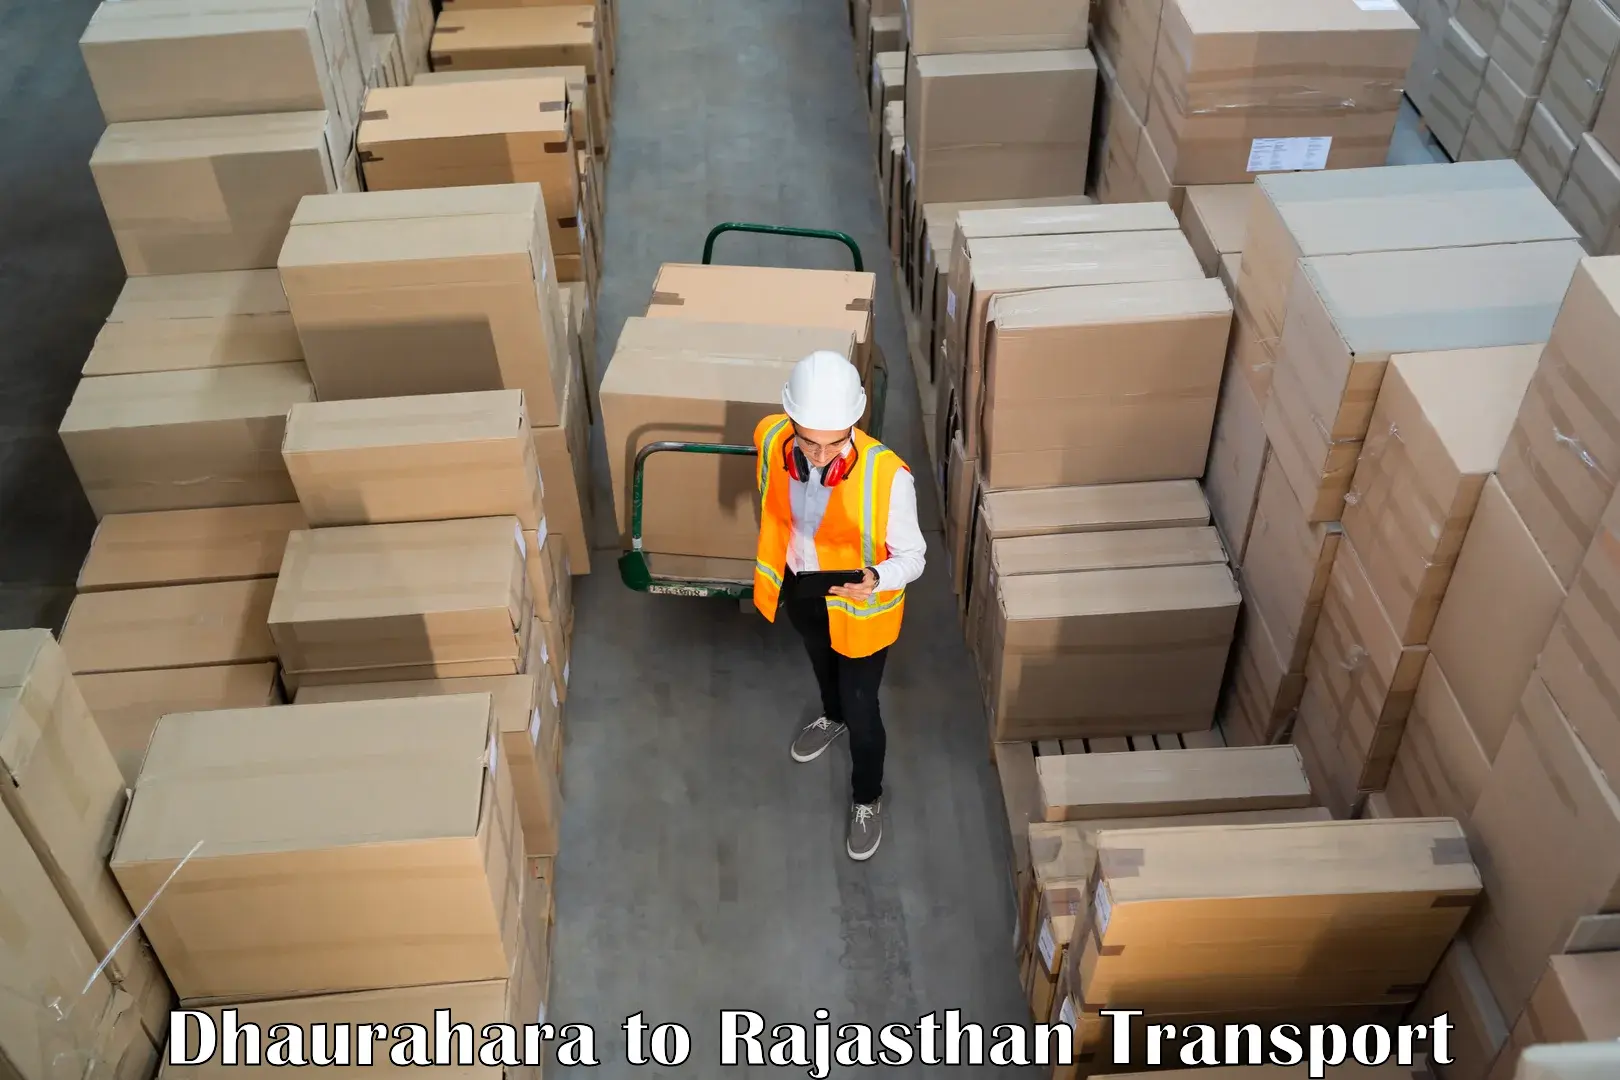 Goods delivery service Dhaurahara to Banar